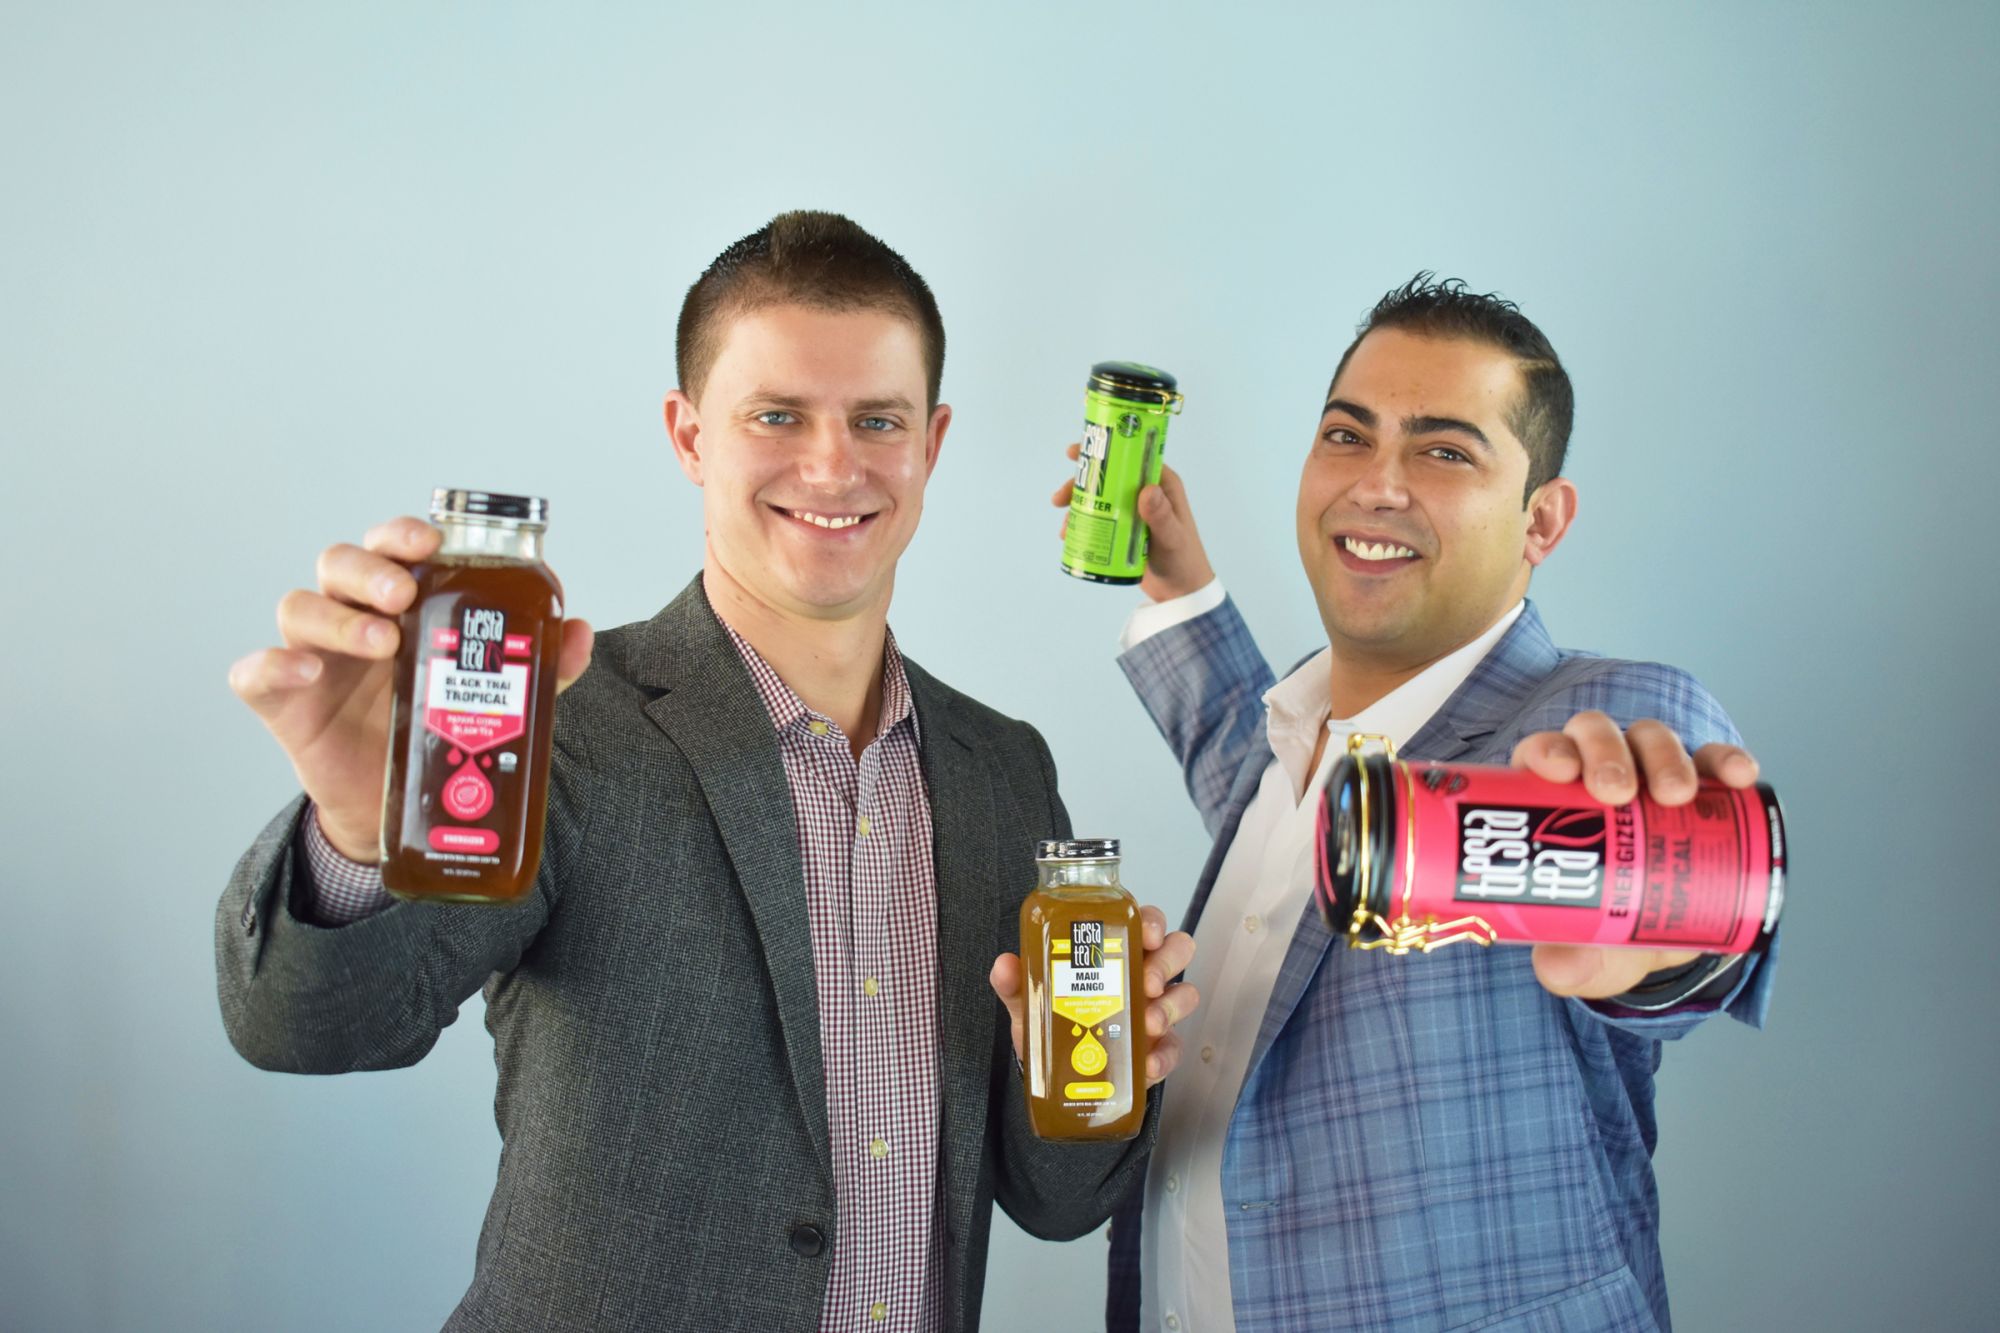 This Nearly $8 Million Tea Brand Was Built on Its Founders Knocking on 500 Doors